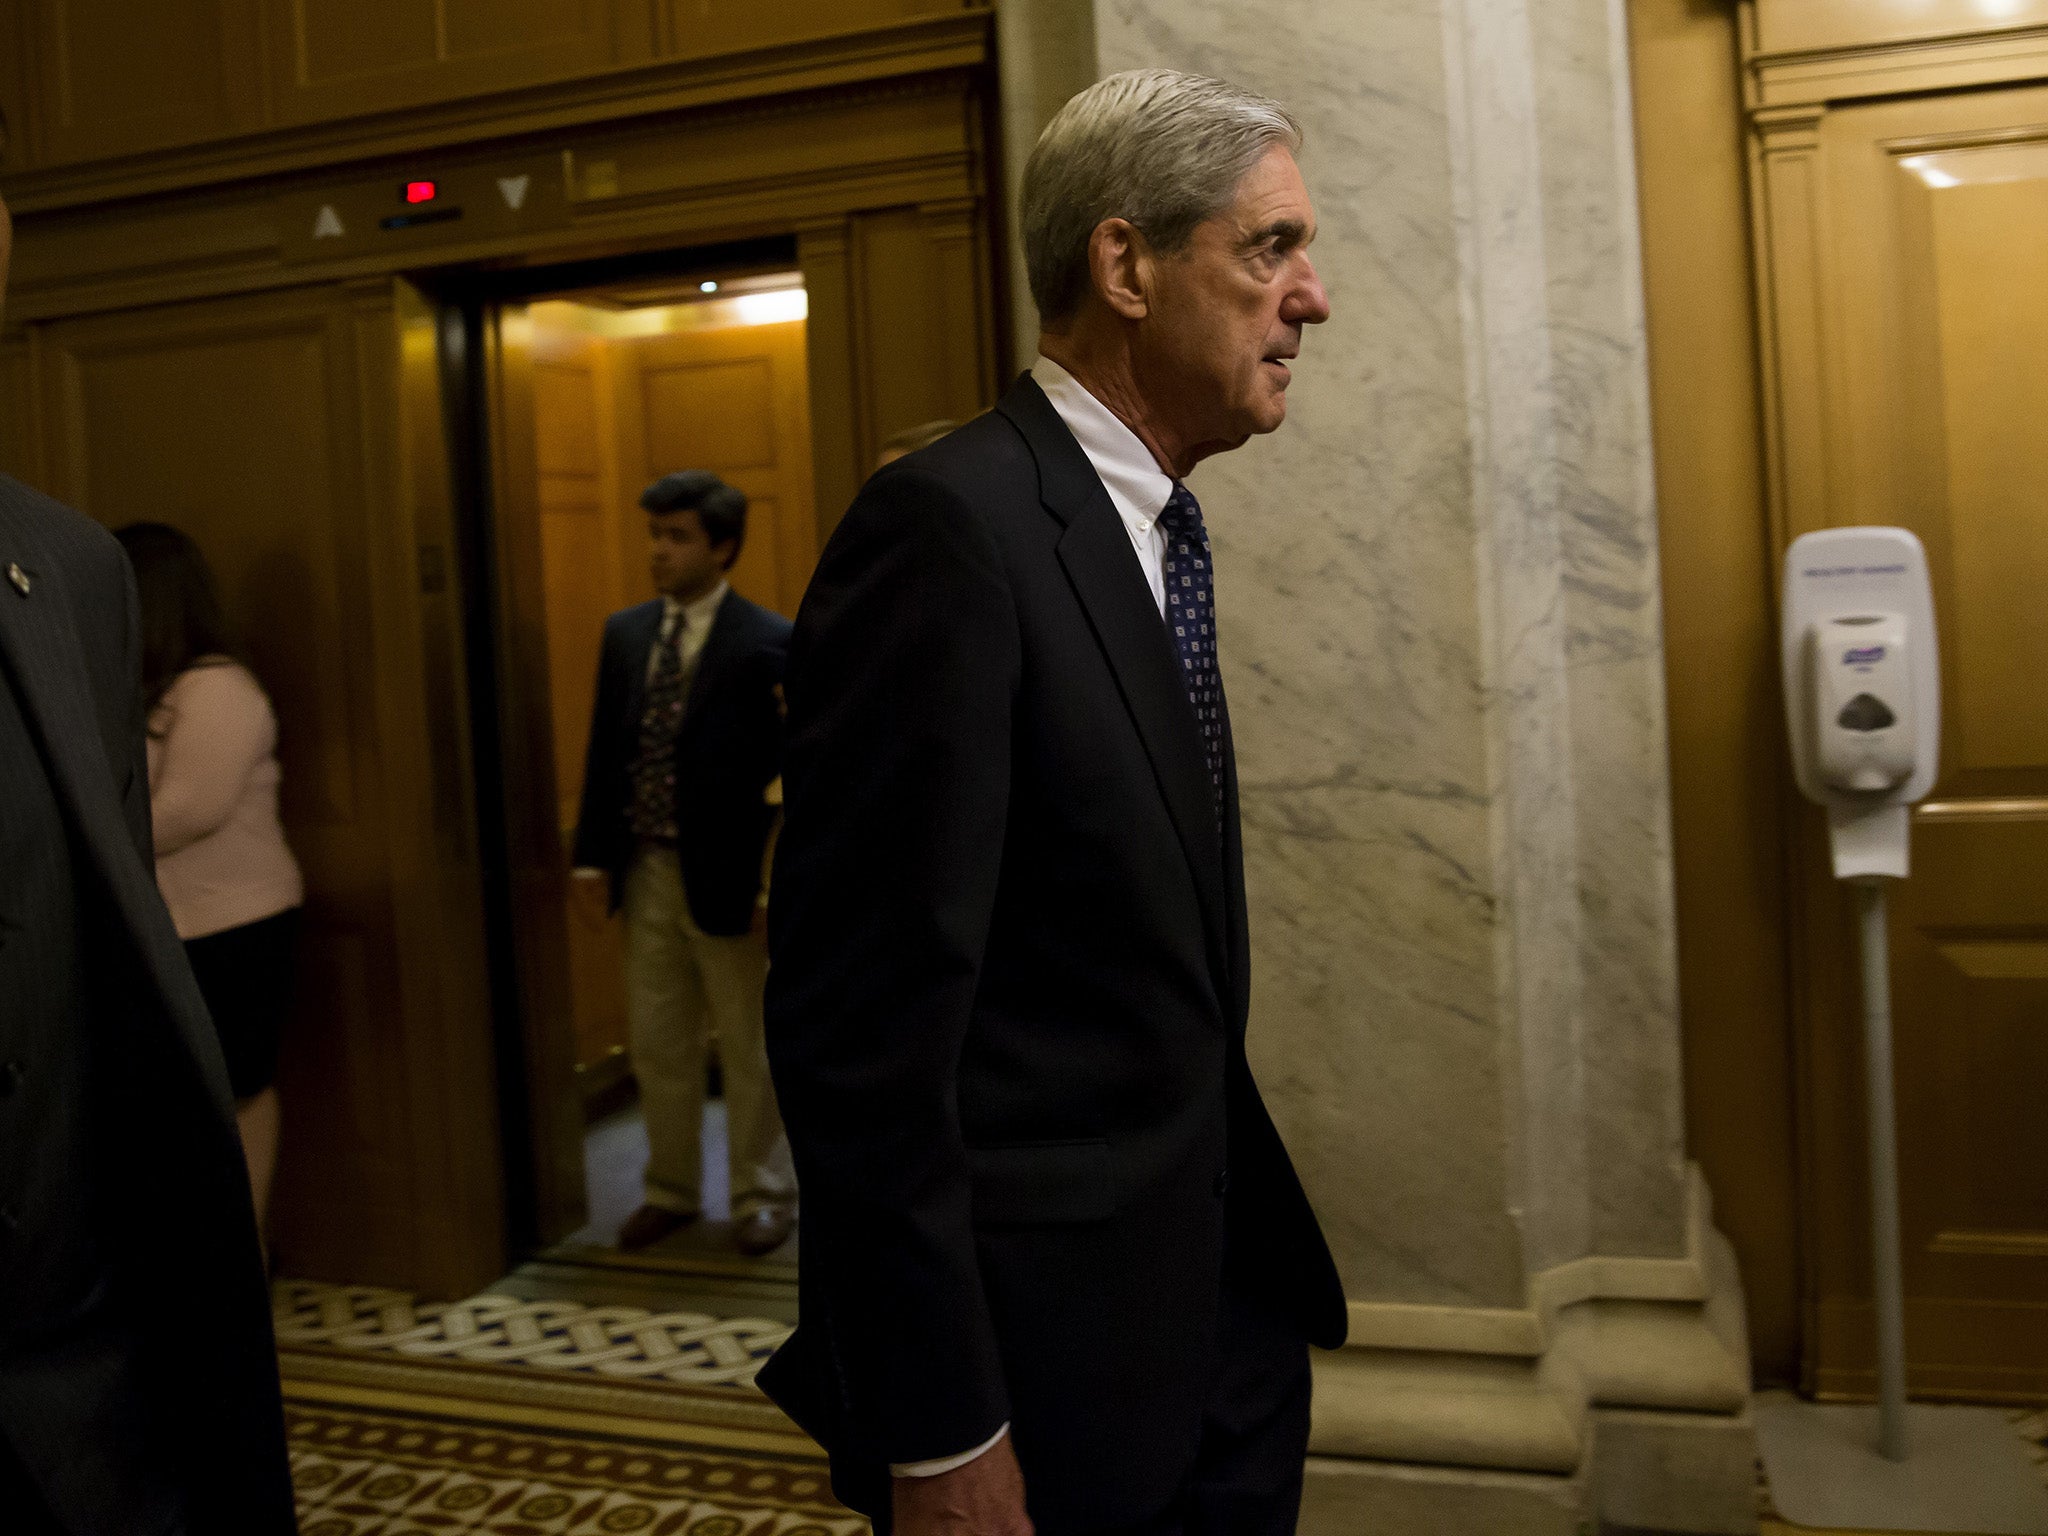 Special counsel Robert Mueller’s investigation may have new fuel